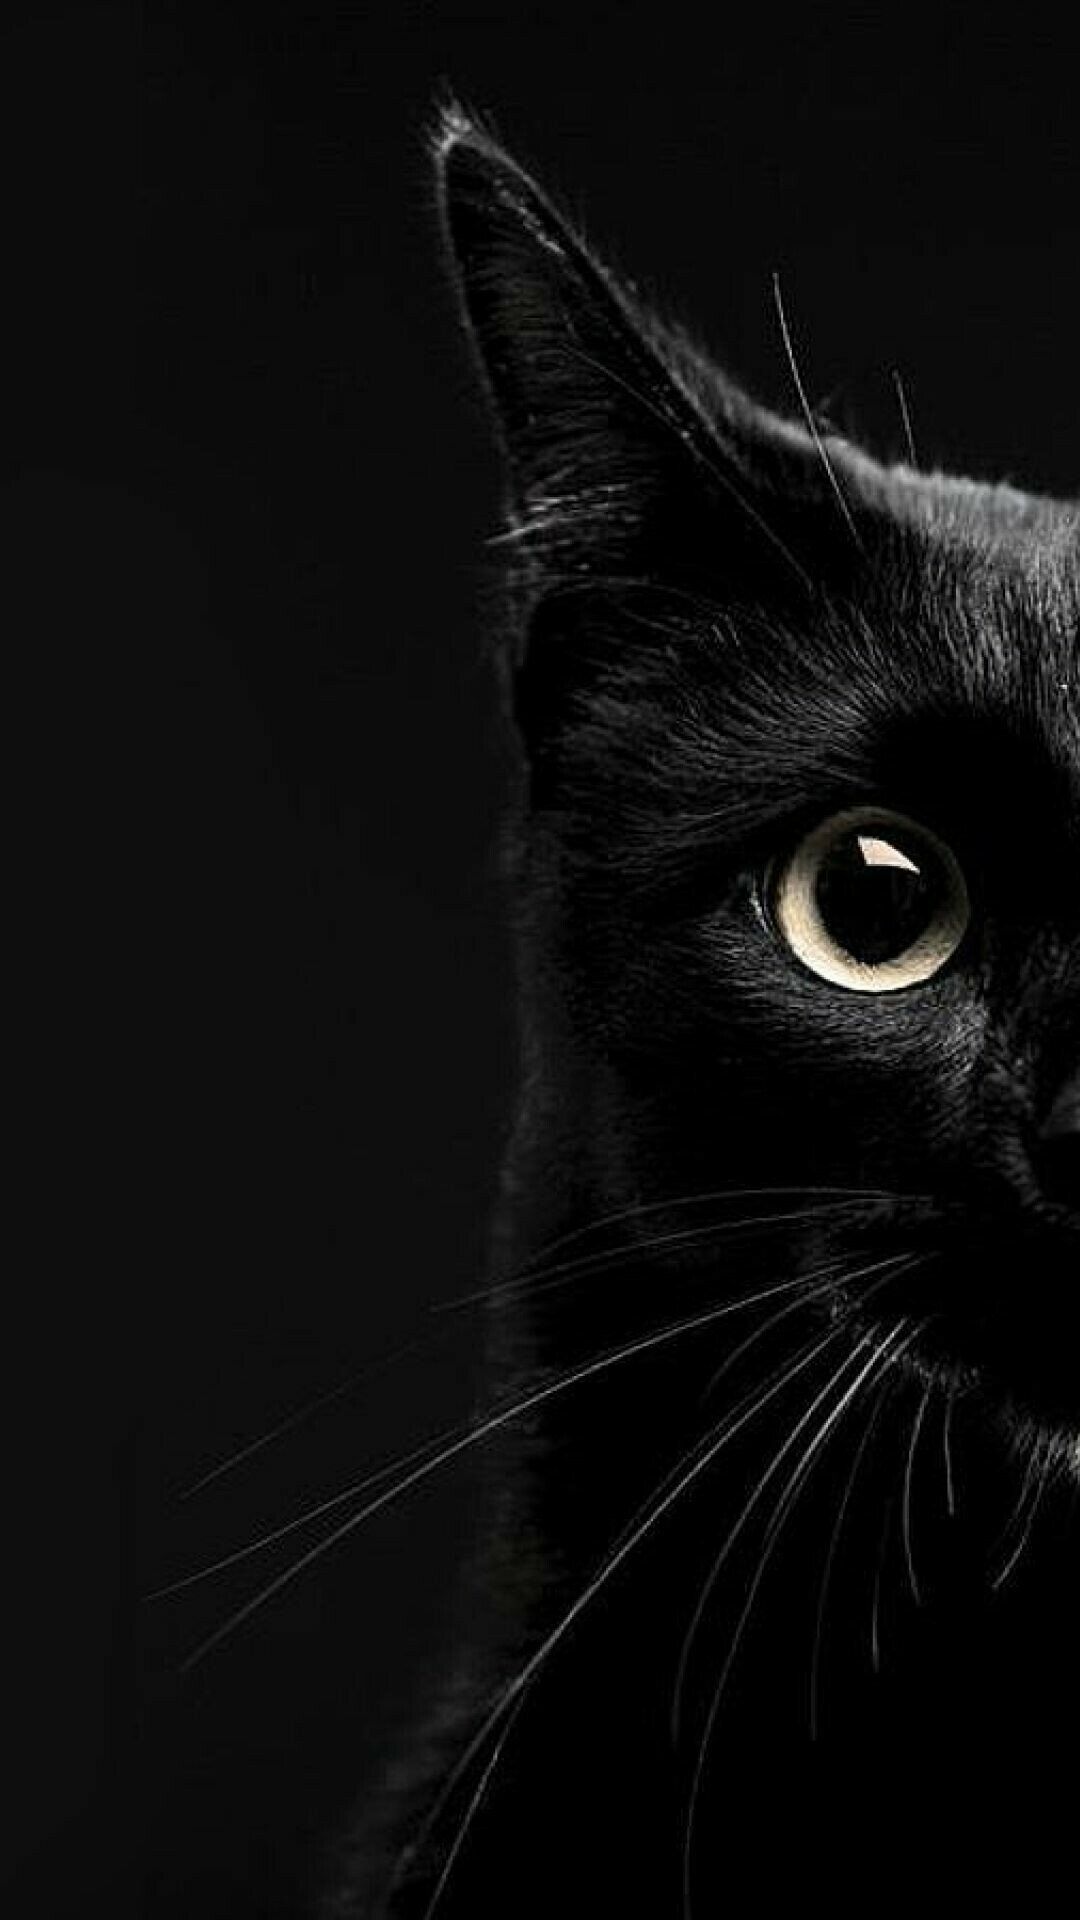 A black cat with yellow eyes. - Cat